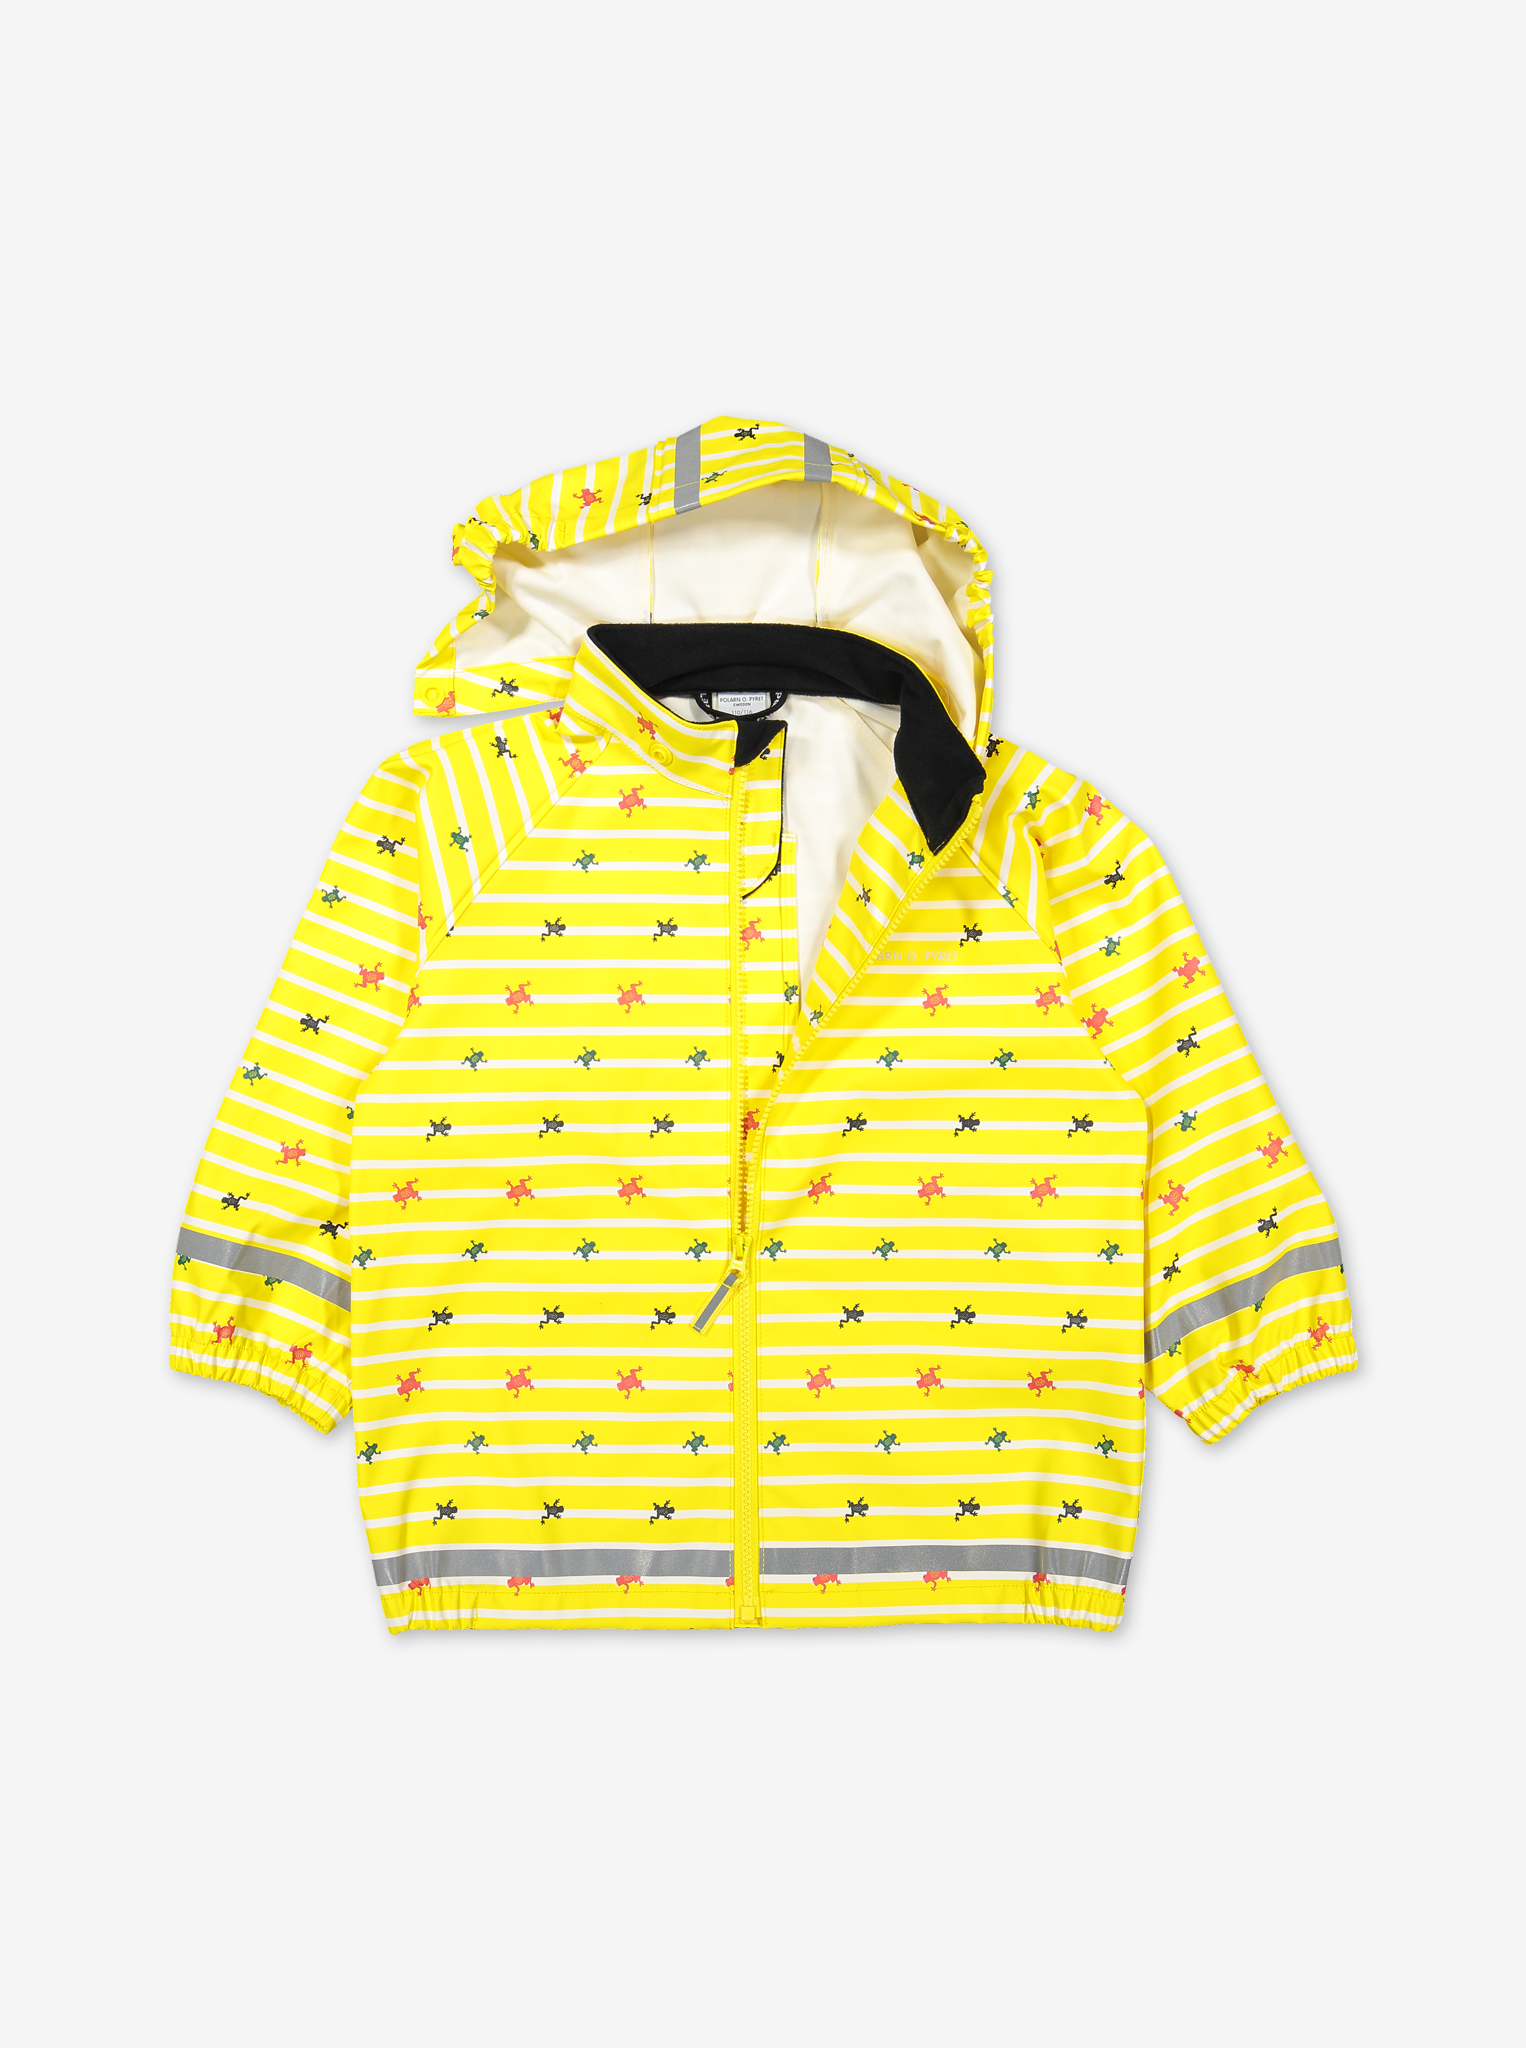 Yellow raincoat for kids with frog & stripes design, includes a detachable hood, elastic cuffs, and reflectors.